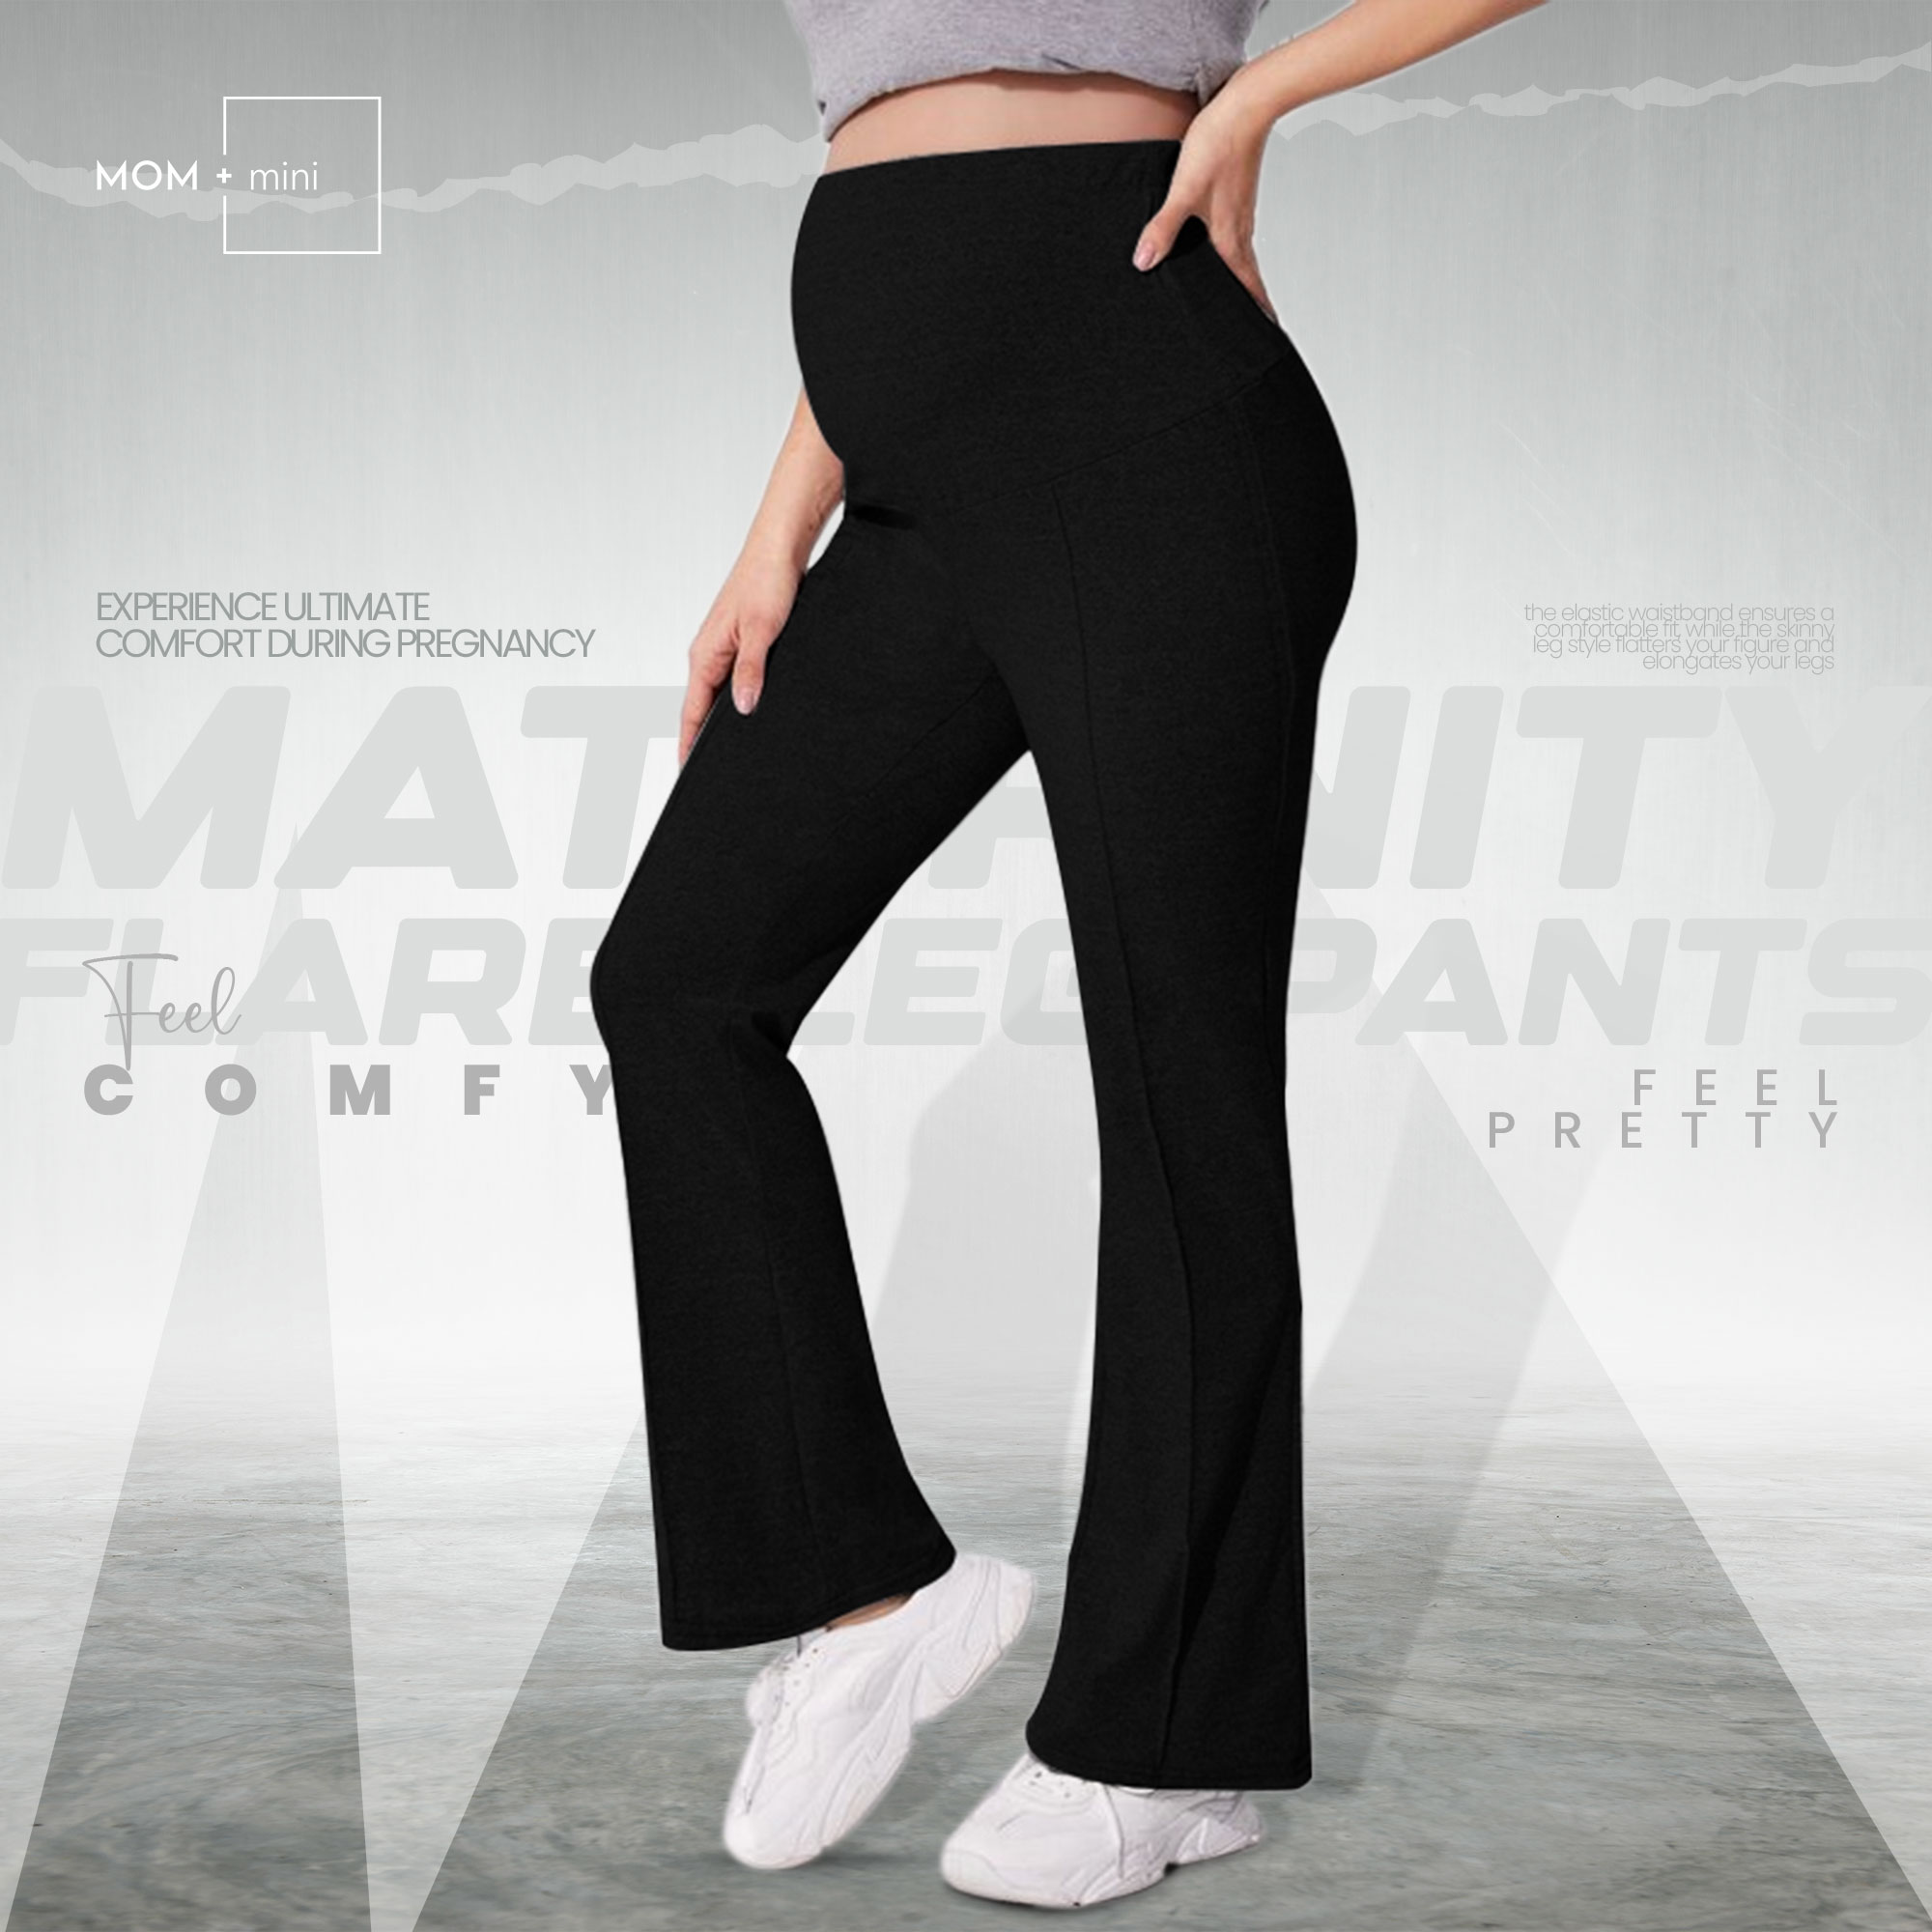 How to Wear Pants Comfortably During Pregnancy?